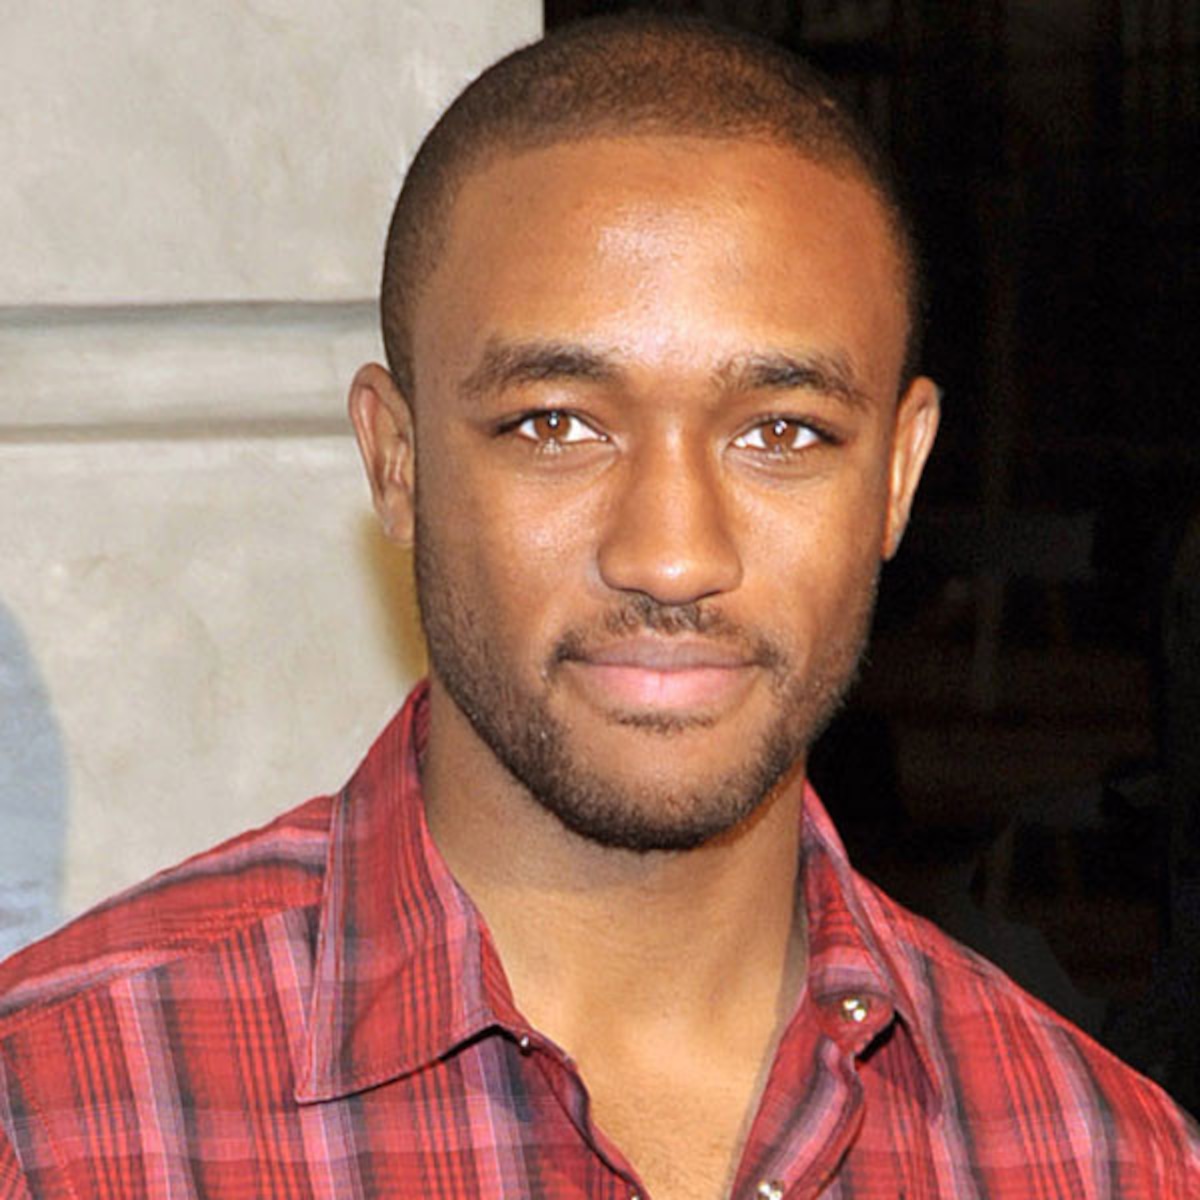 Exclusive: Lee Thompson Young Battled Depression, Says Source - E! Online